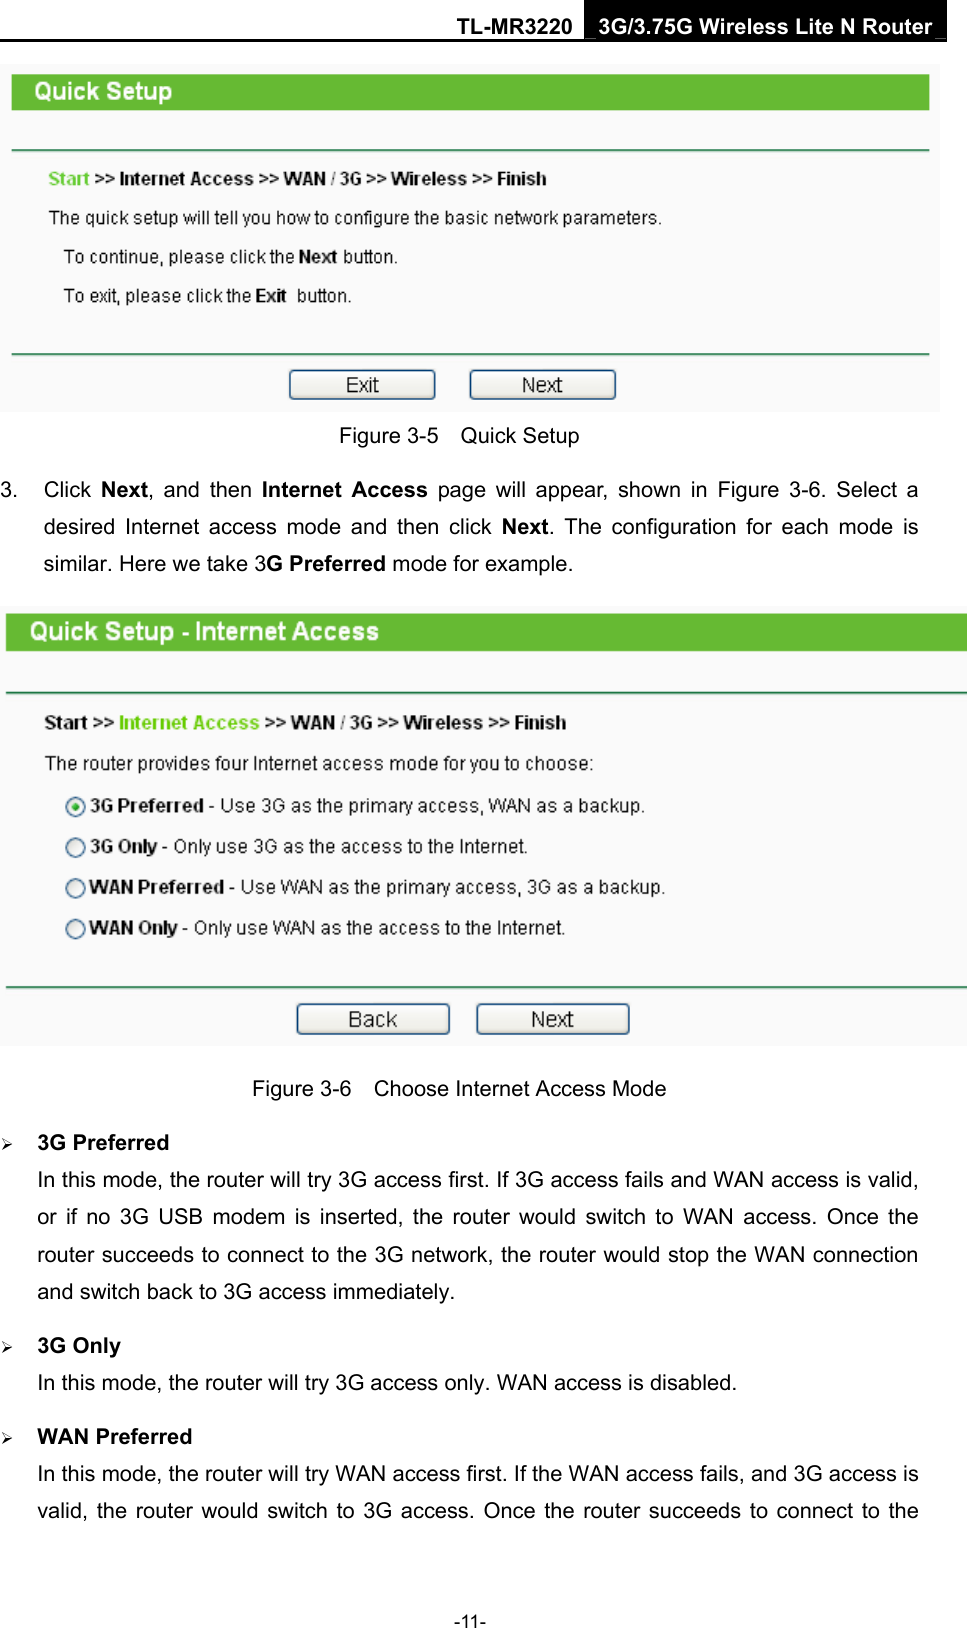 TL-MR3220 3G/3.75G Wireless Lite N Router -11-  Figure 3-5  Quick Setup 3. Click Next, and then Internet Access page will appear, shown in Figure 3-6. Select a desired Internet access mode and then click Next. The configuration for each mode is similar. Here we take 3G Preferred mode for example.  Figure 3-6    Choose Internet Access Mode ¾ 3G Preferred In this mode, the router will try 3G access first. If 3G access fails and WAN access is valid, or if no 3G USB modem is inserted, the router would switch to WAN access. Once the router succeeds to connect to the 3G network, the router would stop the WAN connection and switch back to 3G access immediately. ¾ 3G Only In this mode, the router will try 3G access only. WAN access is disabled. ¾ WAN Preferred In this mode, the router will try WAN access first. If the WAN access fails, and 3G access is valid, the router would switch to 3G access. Once the router succeeds to connect to the 